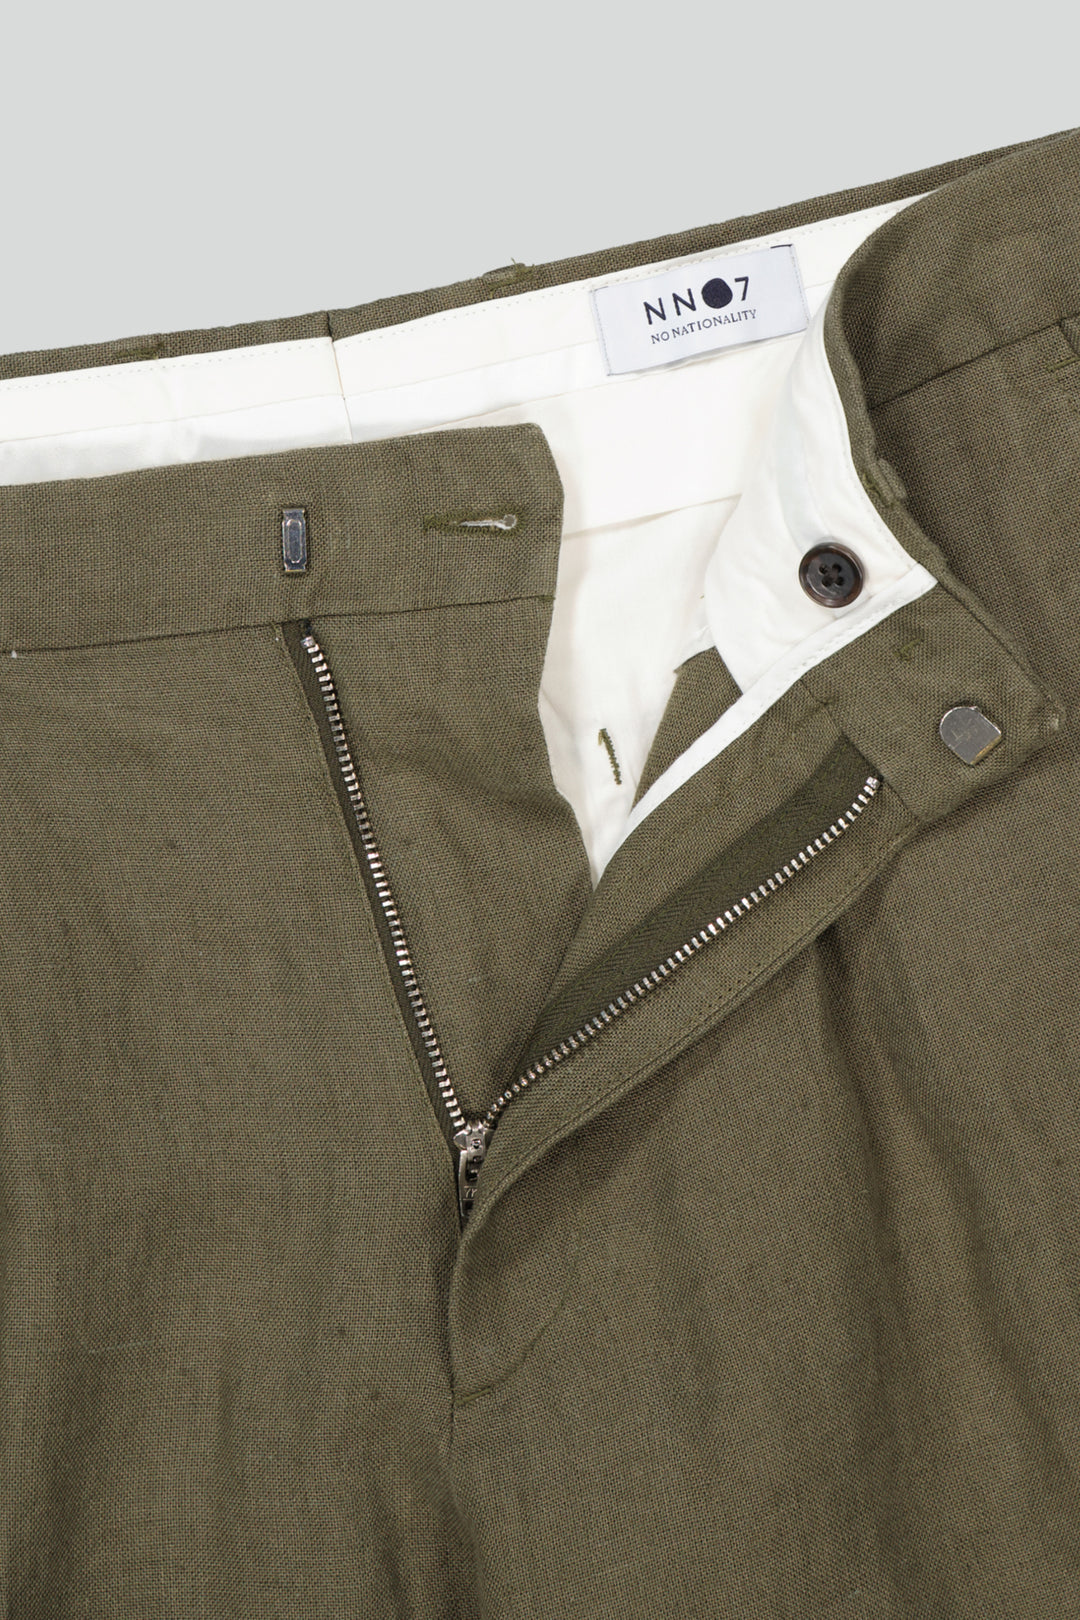 NN07 - Bill 1196 Linen Pant in Khaki Army | Buster McGee